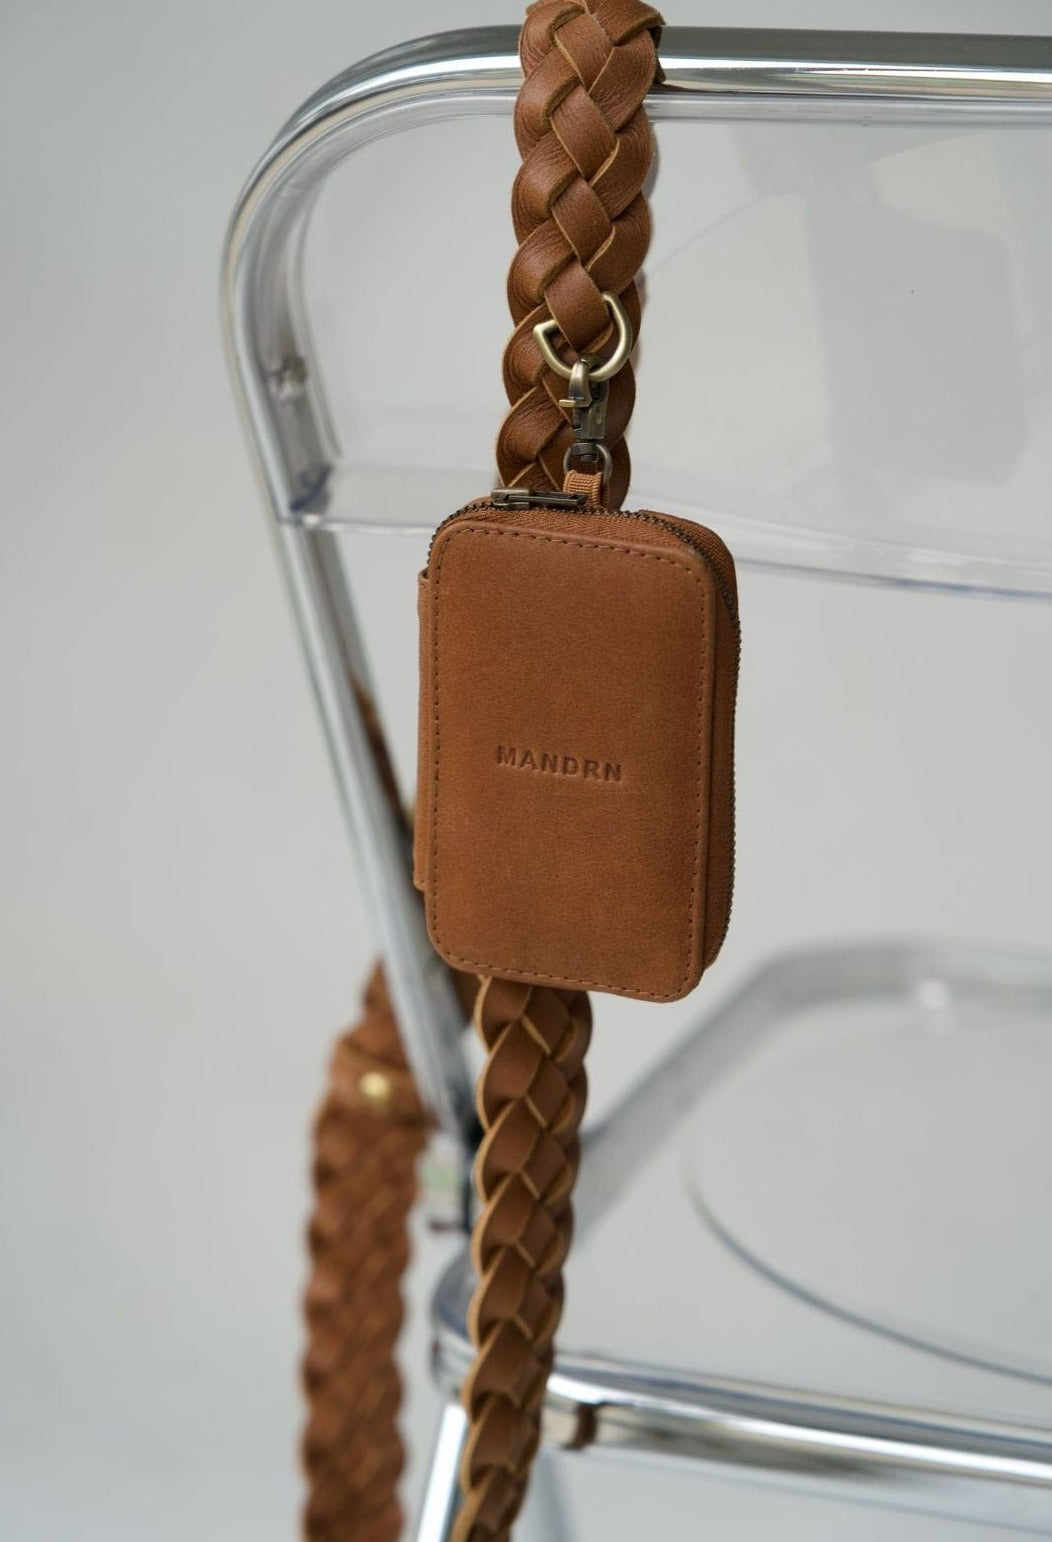 MANDRN  The Carry - Tan Woven Leather Strap